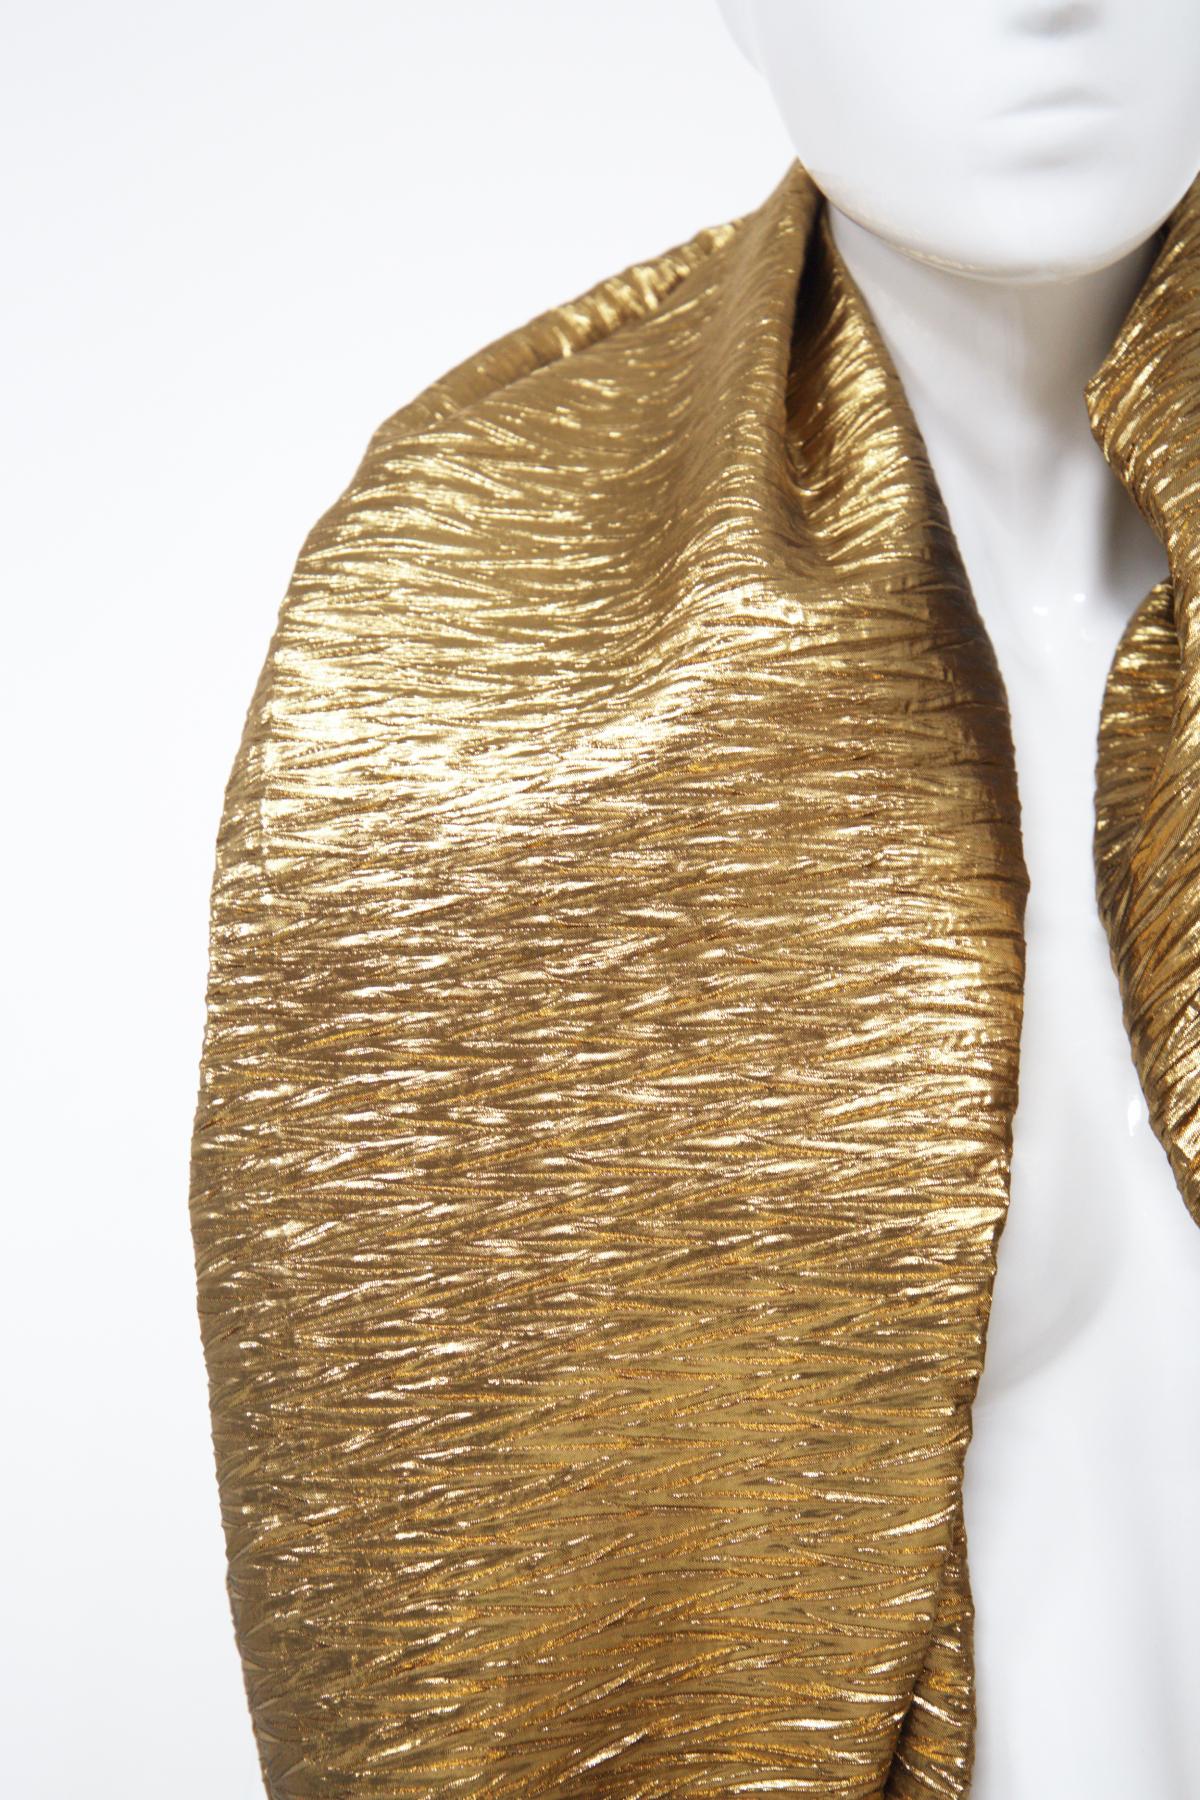 A wonderful and classic vintage silk stole designed in the 1990s, made in Italy.
The stole is made entirely of gold silk satin, very elegant and precious.
The stole is long enough to create any composition you want on your dress. The weave is not